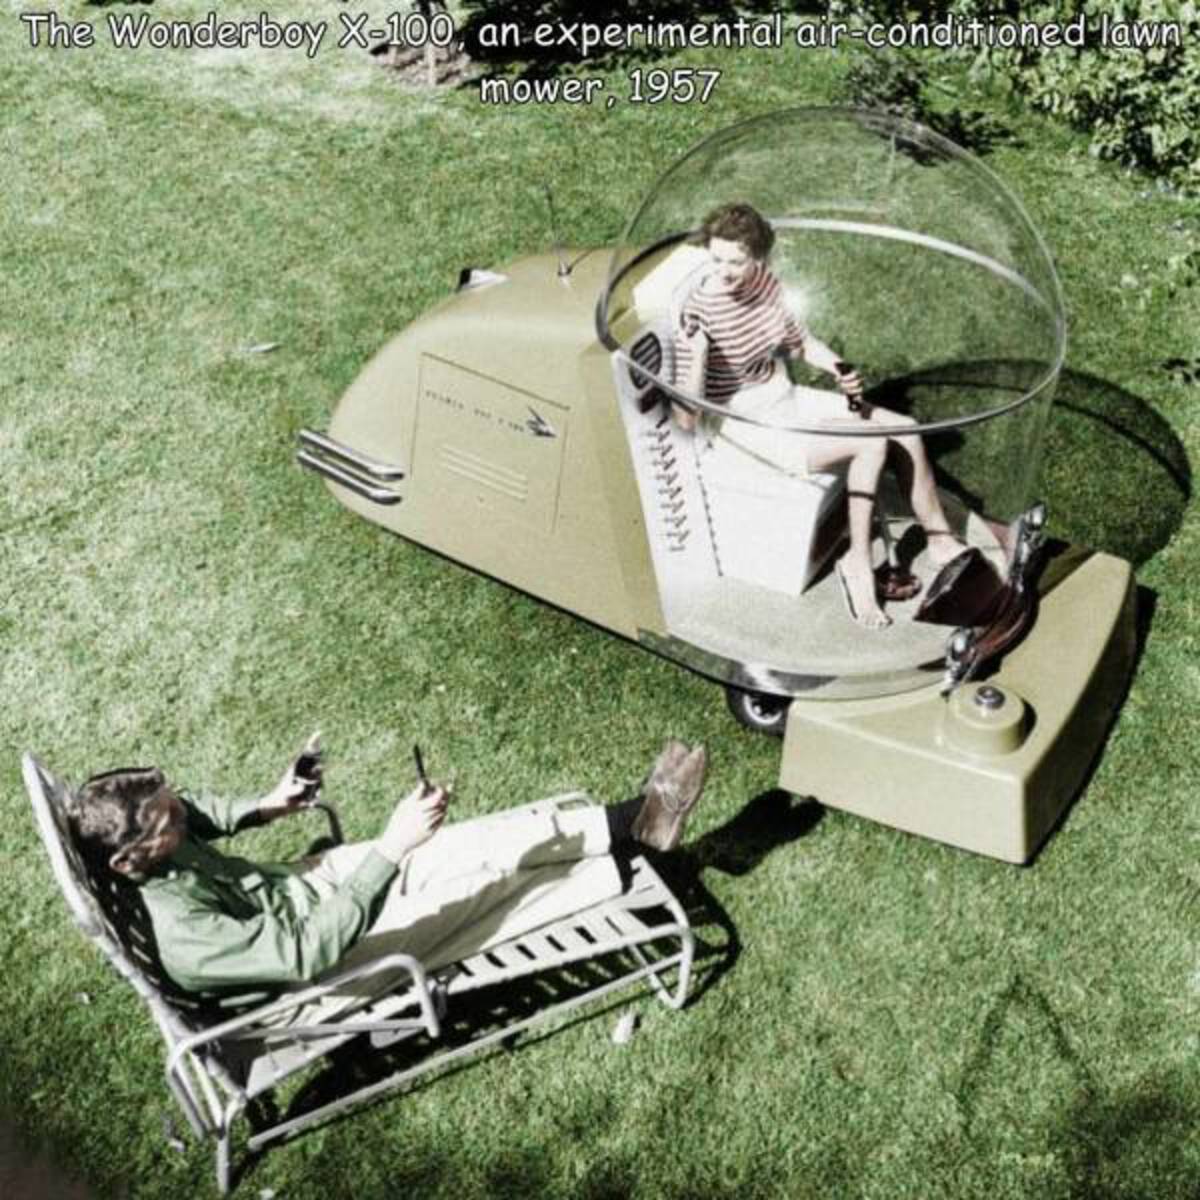 1950 riding lawn mower - The Wonderboy X100, an experimental airconditioned lawn mower 1957